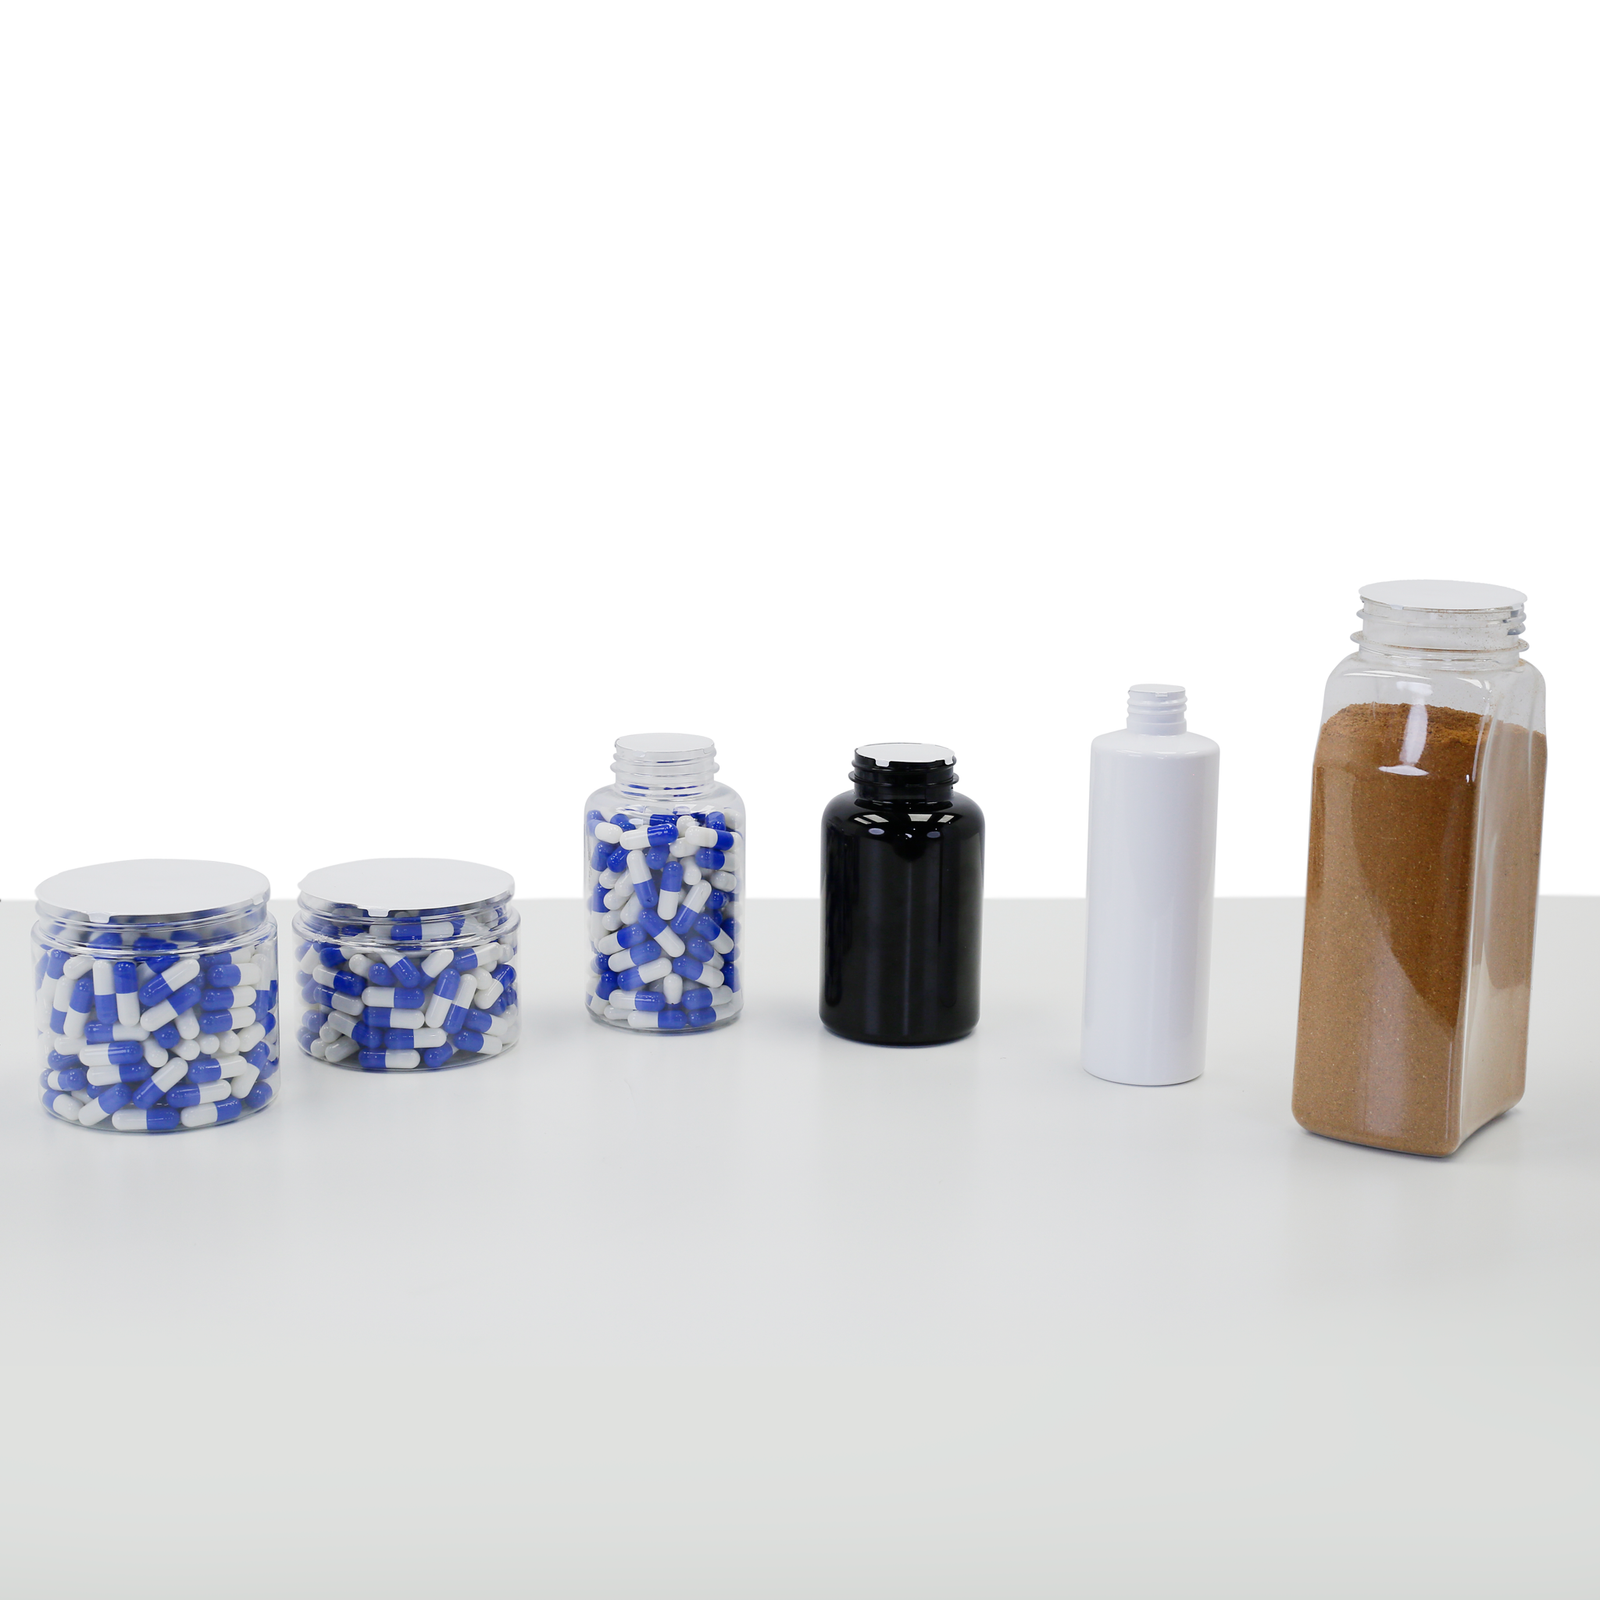 A collection of containers of different sizes which have been sealed with induction liners using the electromagnetic cap sealer